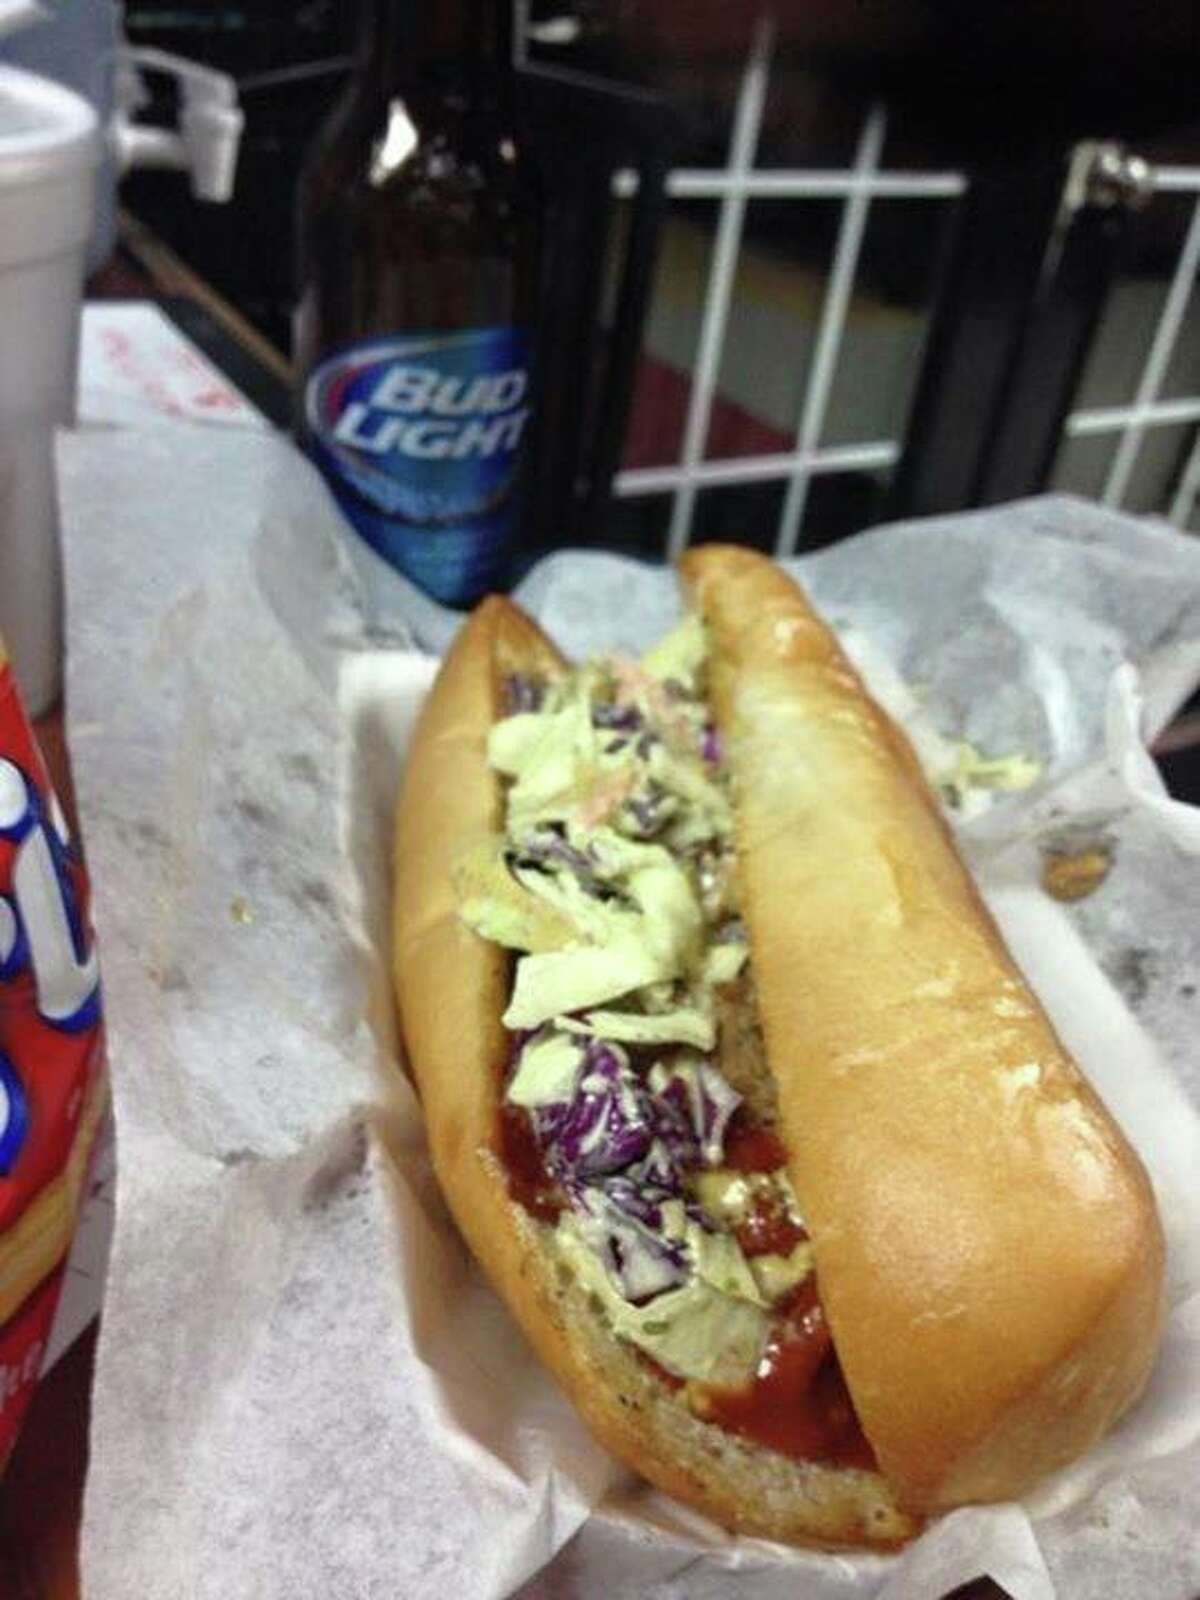 The Big Bad Wolf, a jumbo hot dog stuffed with pulled pork, from Senor Pinky's, located at 1506 Blanco Rd.